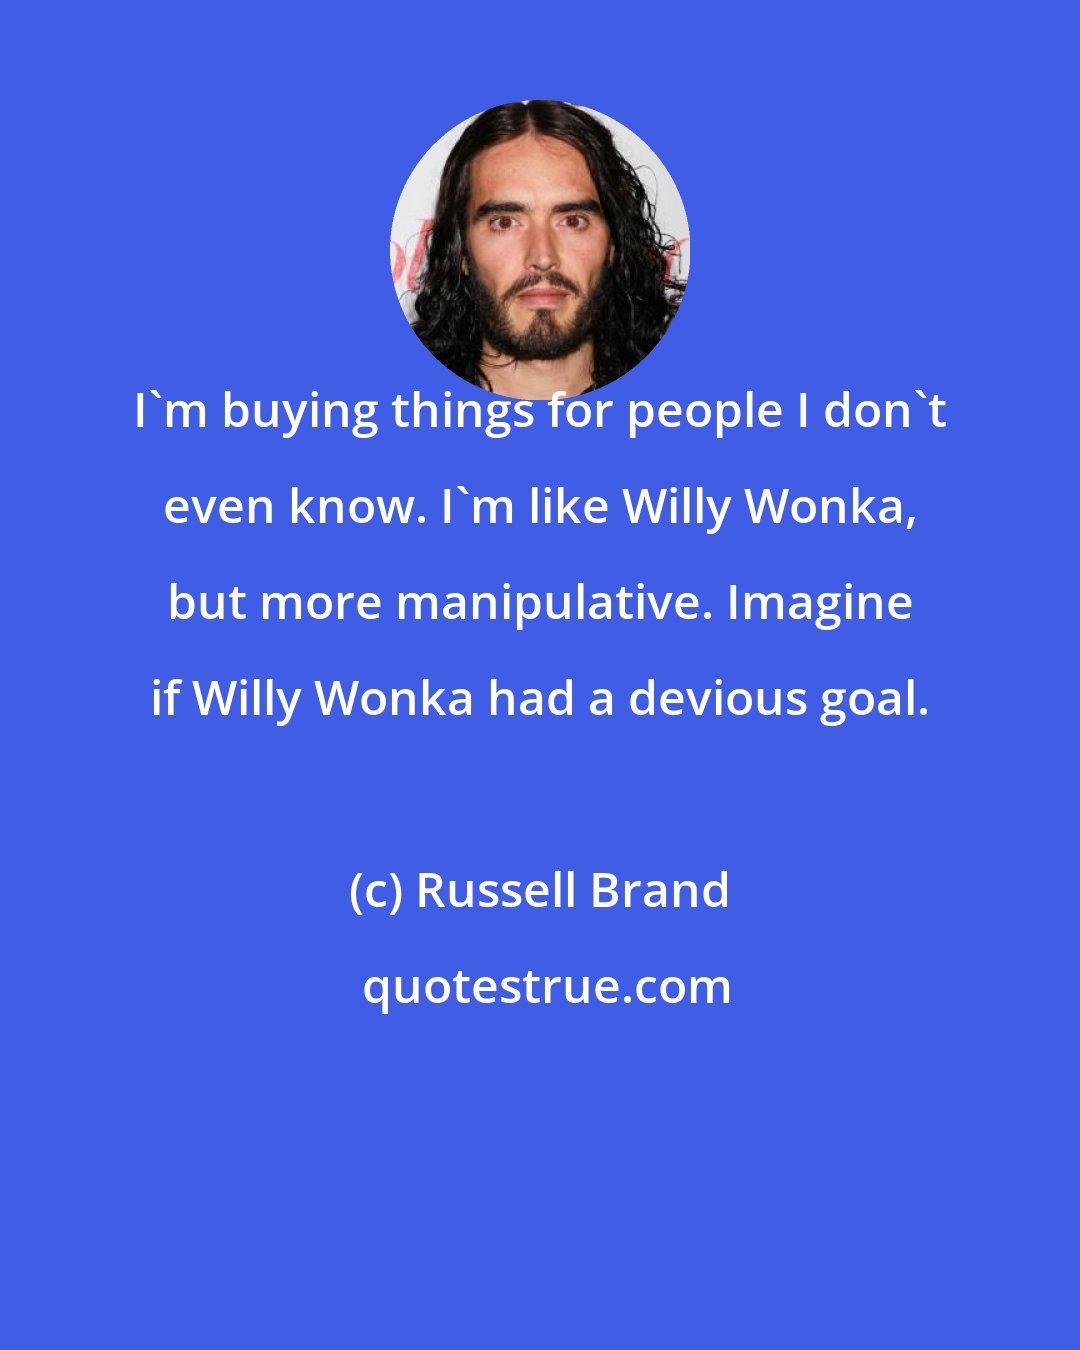 Russell Brand: I'm buying things for people I don't even know. I'm like Willy Wonka, but more manipulative. Imagine if Willy Wonka had a devious goal.